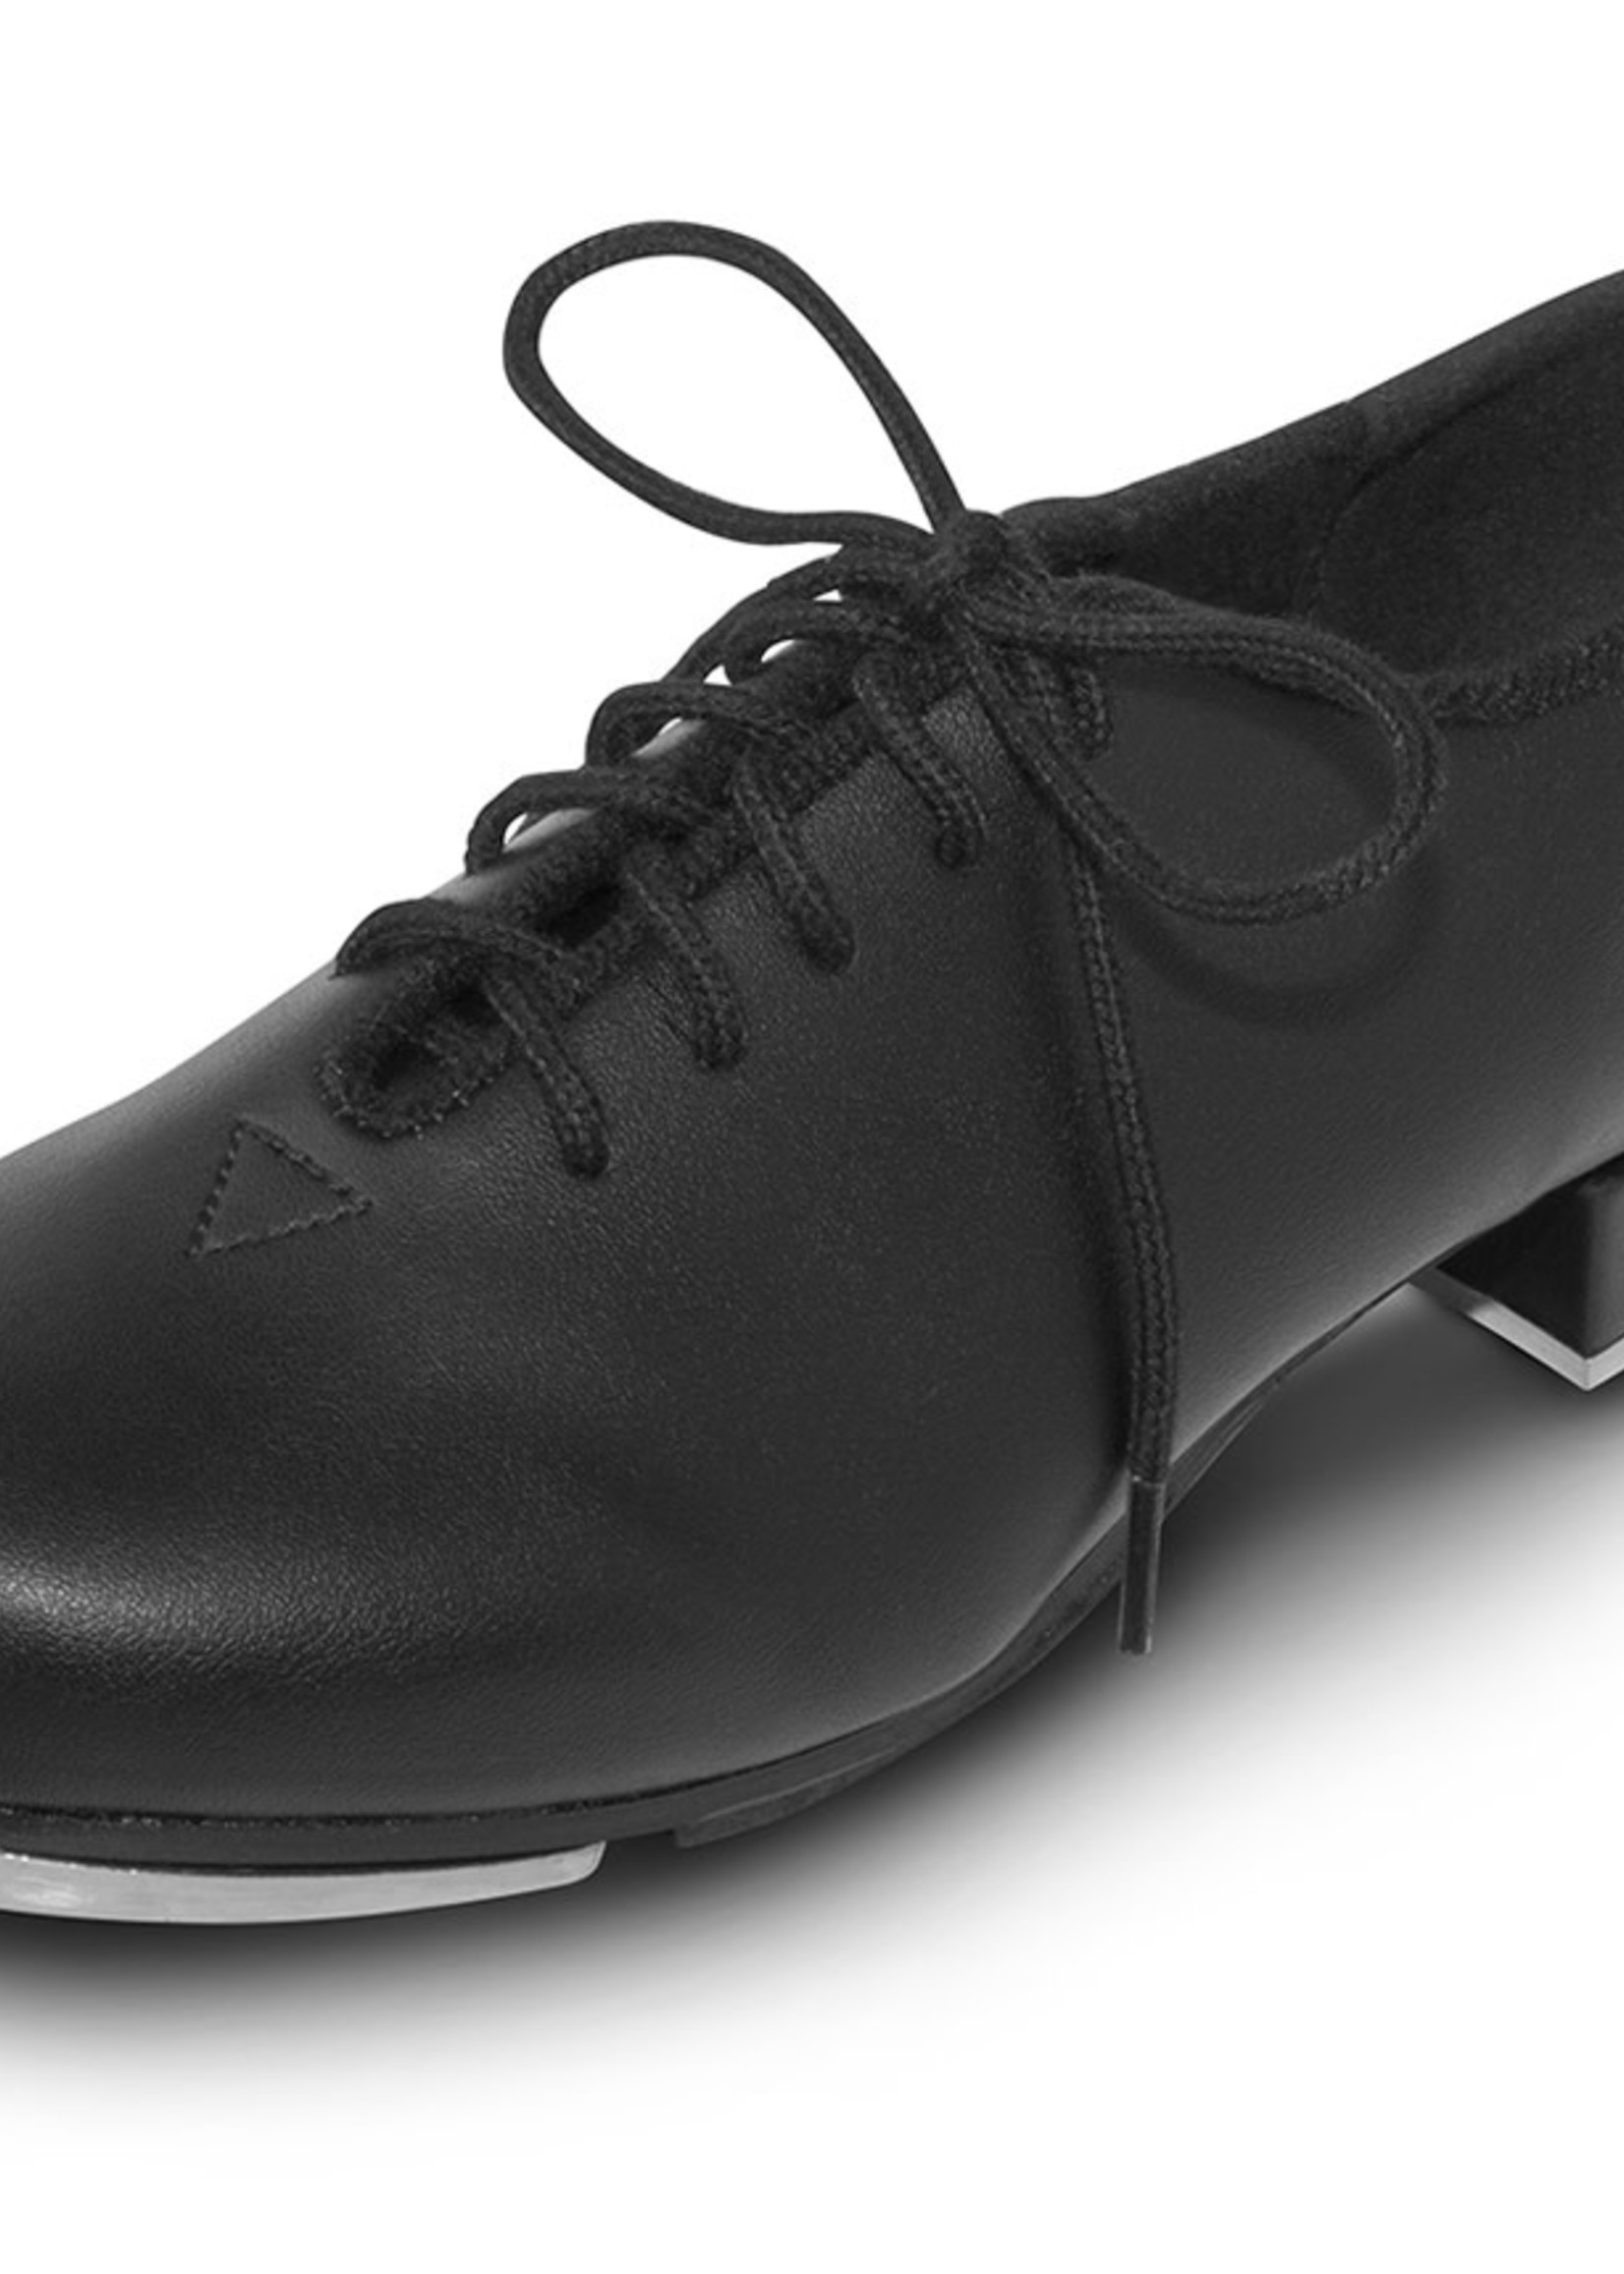 Leo's Adult Oxford Jazz Lace Up Tap Shoe